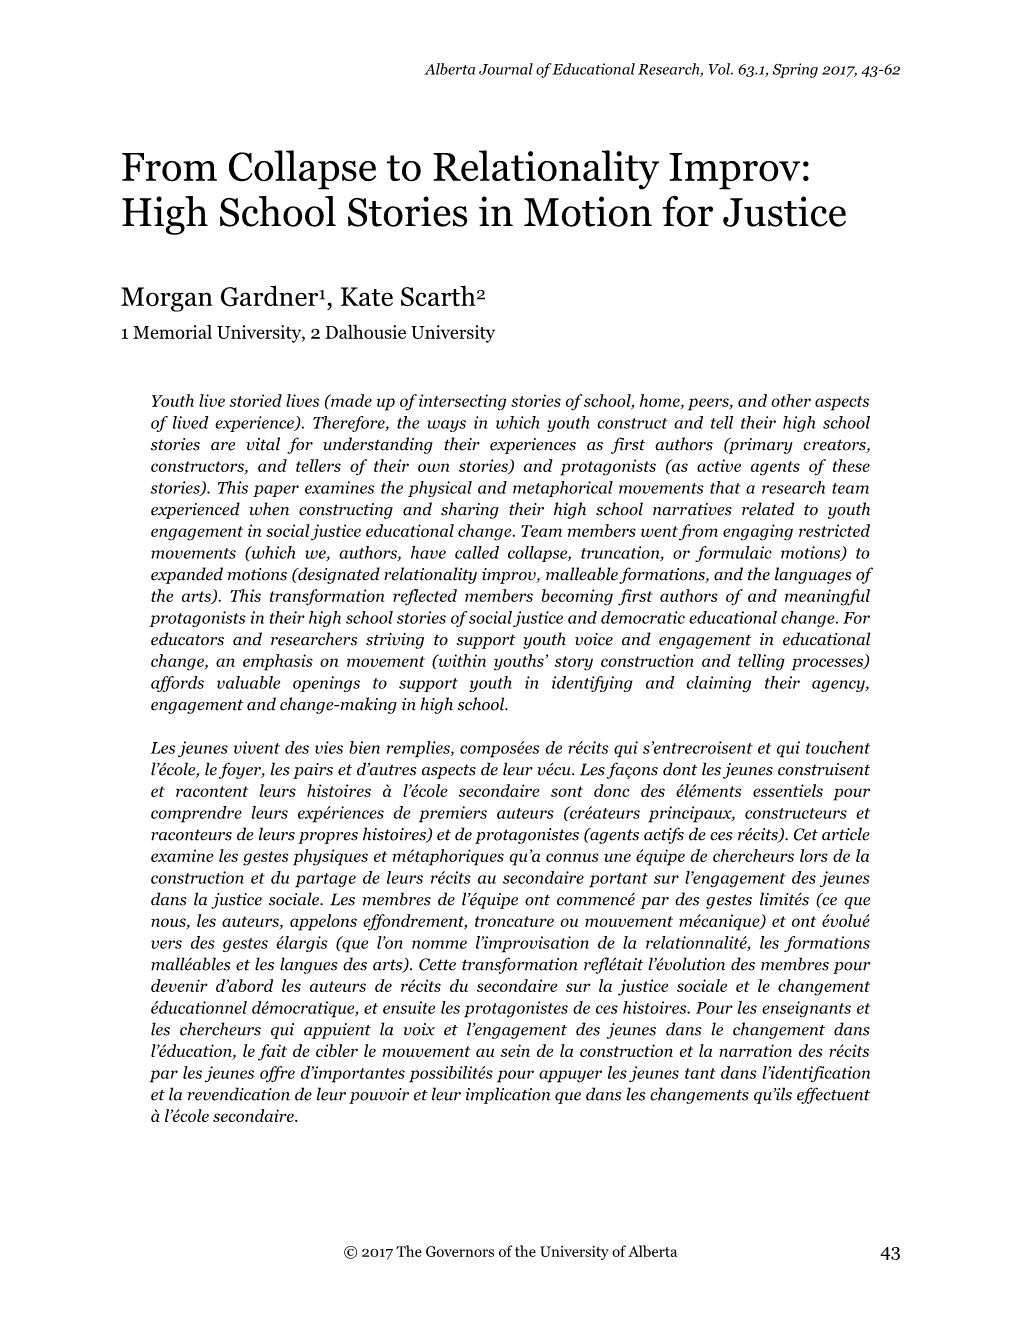 From Collapse to Relationality Improv: High School Stories in Motion for Justice